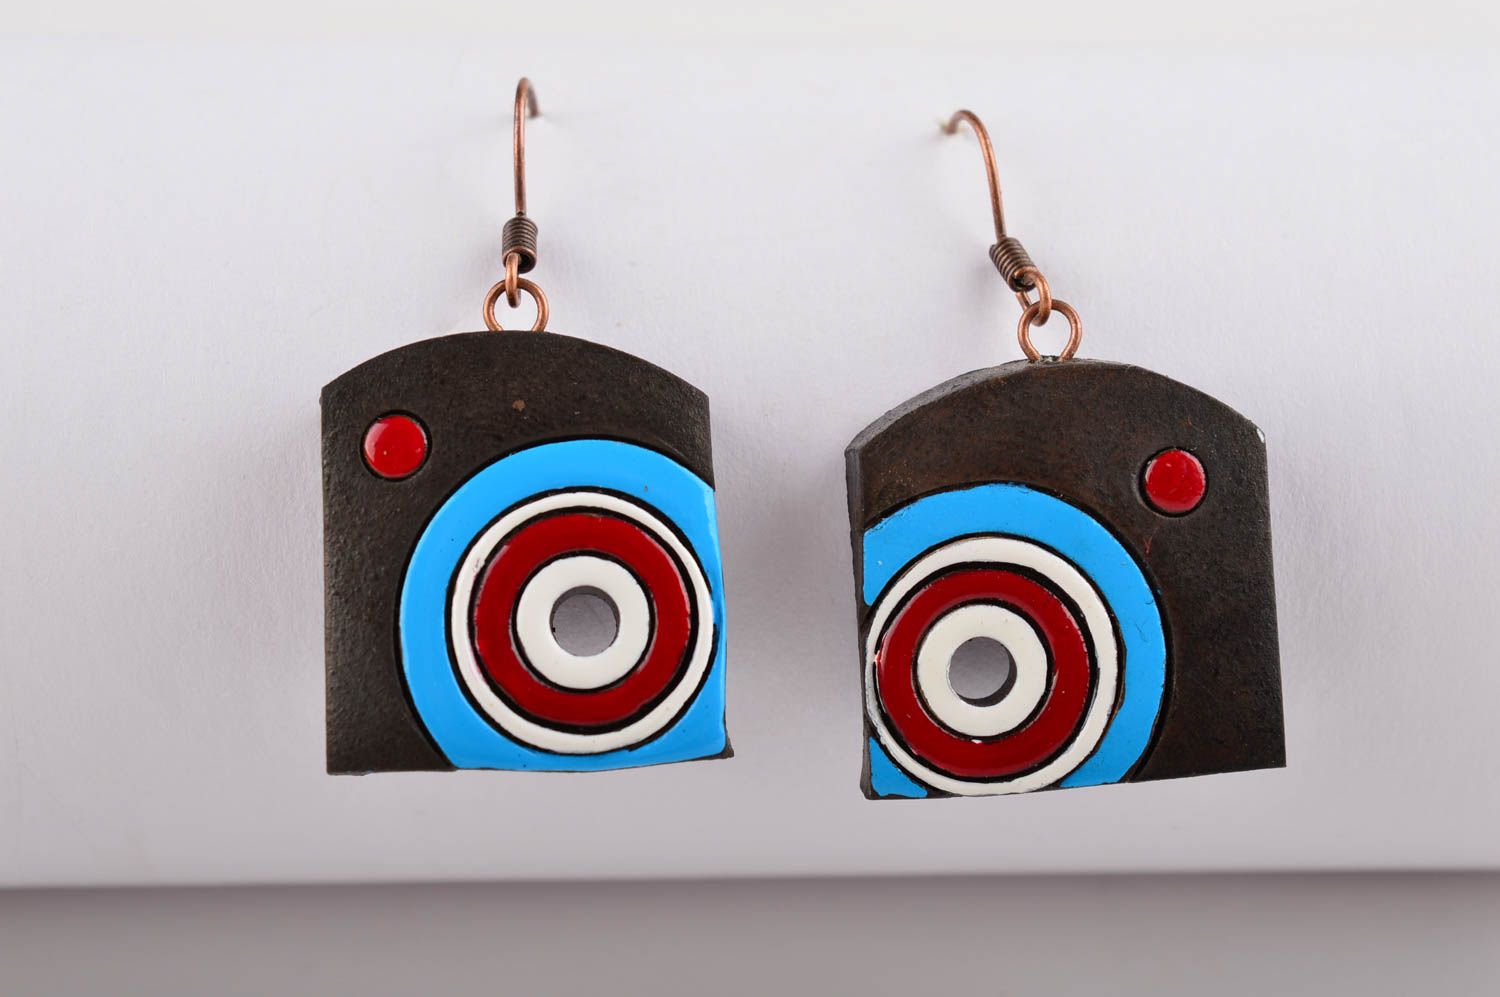 Handmade jewelry fashion earrings ceramic earrings unique jewelry cool gifts photo 1